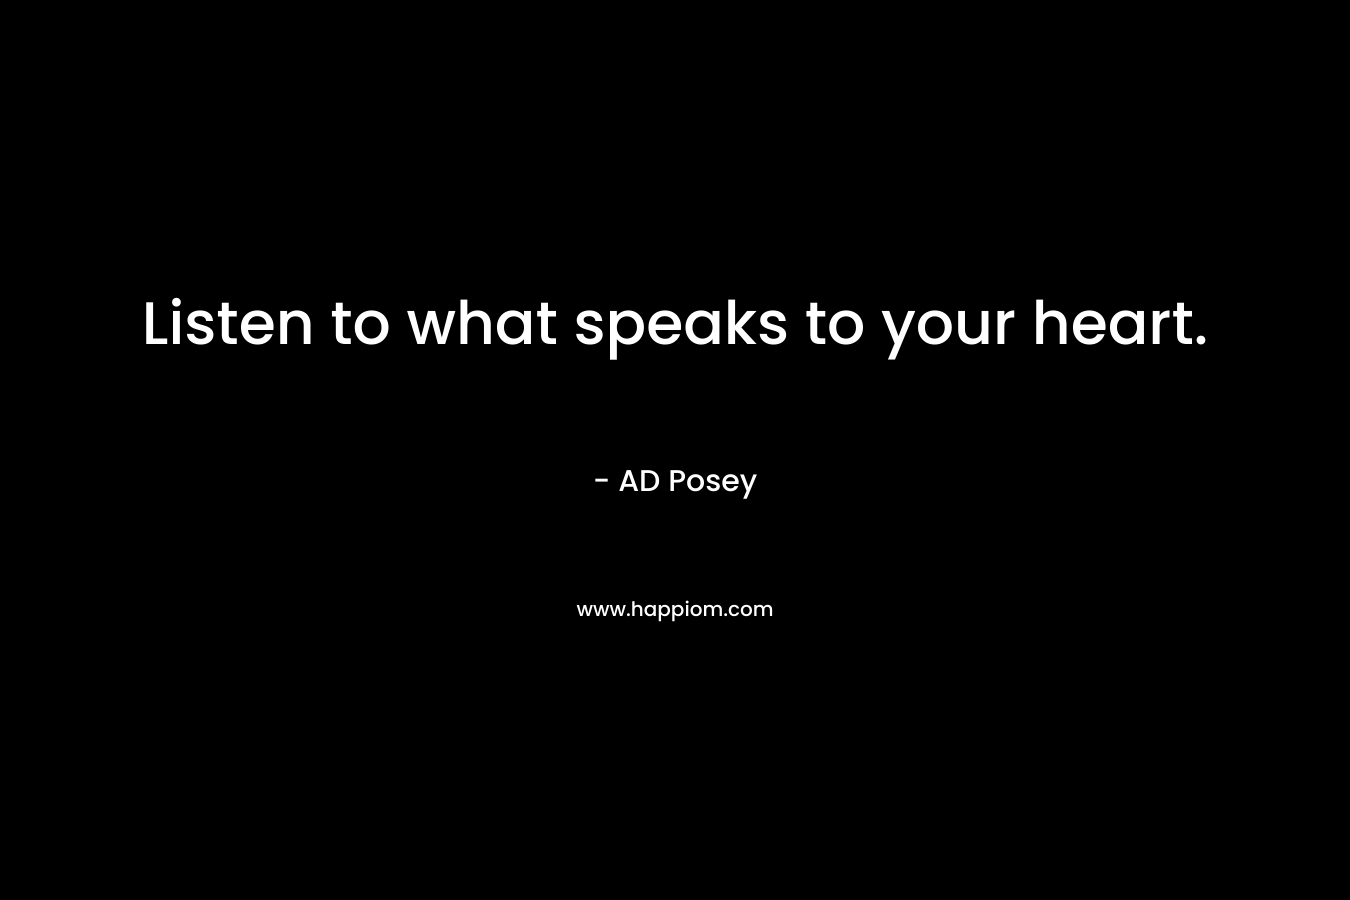 Listen to what speaks to your heart.